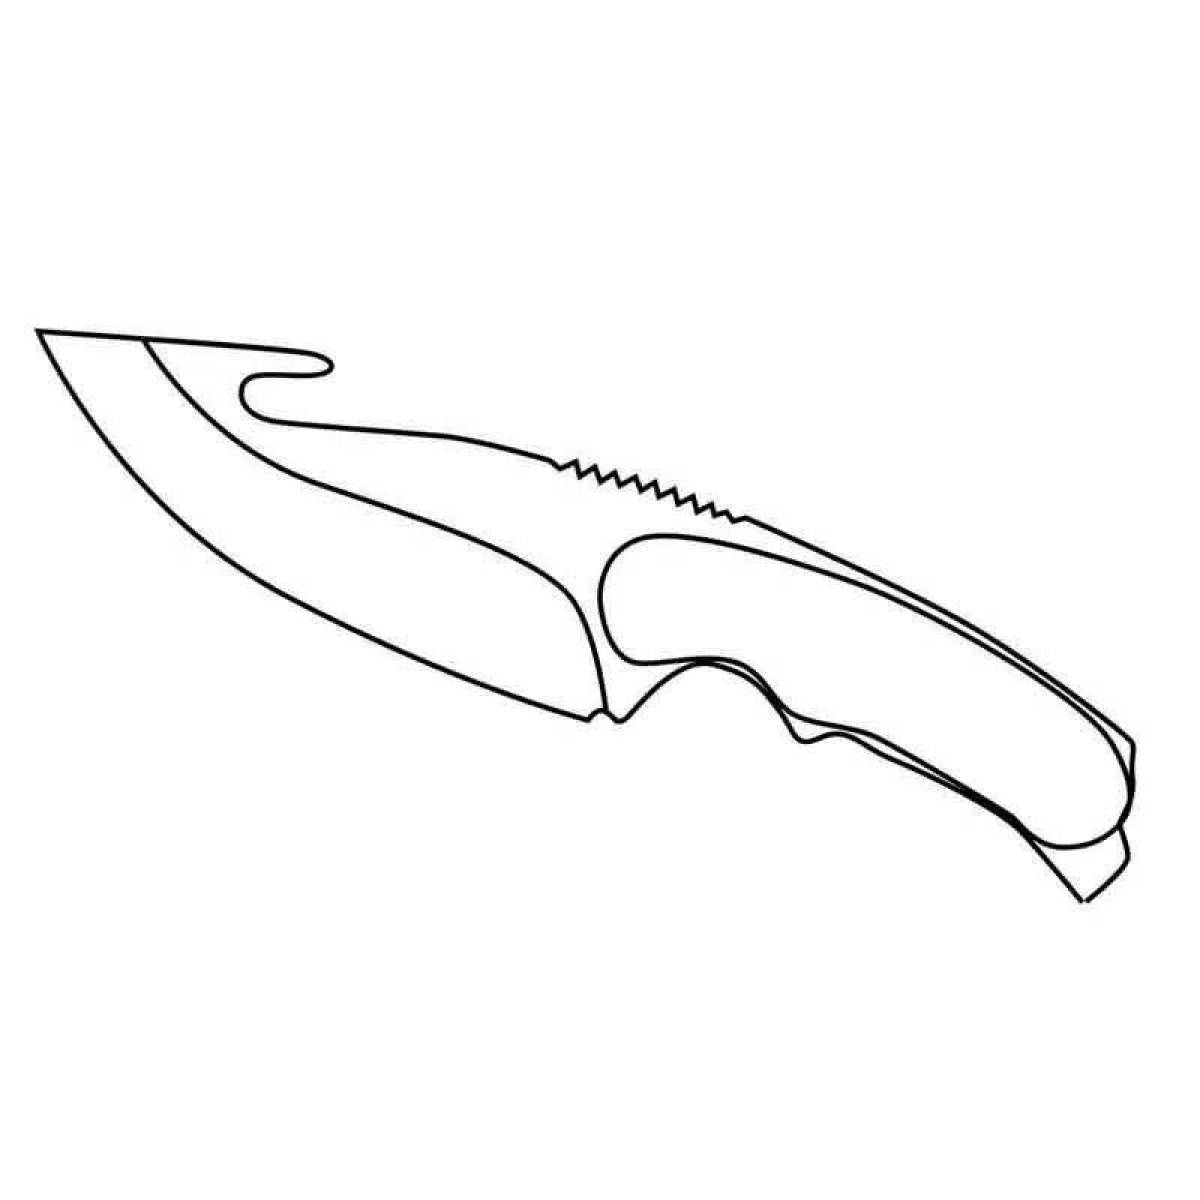 Colouring stylish knives from standoff 2